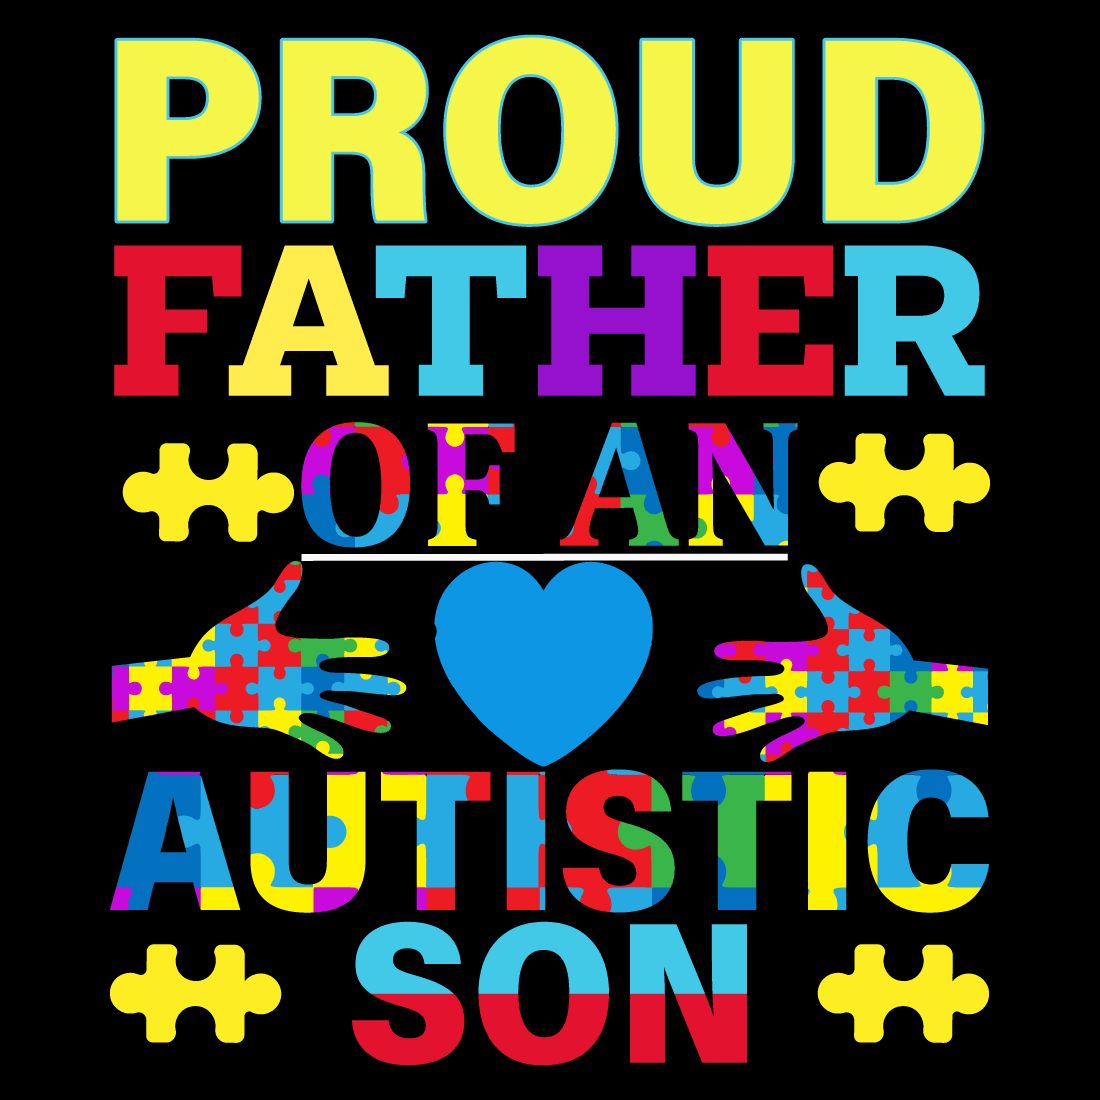 Poster that says proud father of an autistic son by Andries Both.